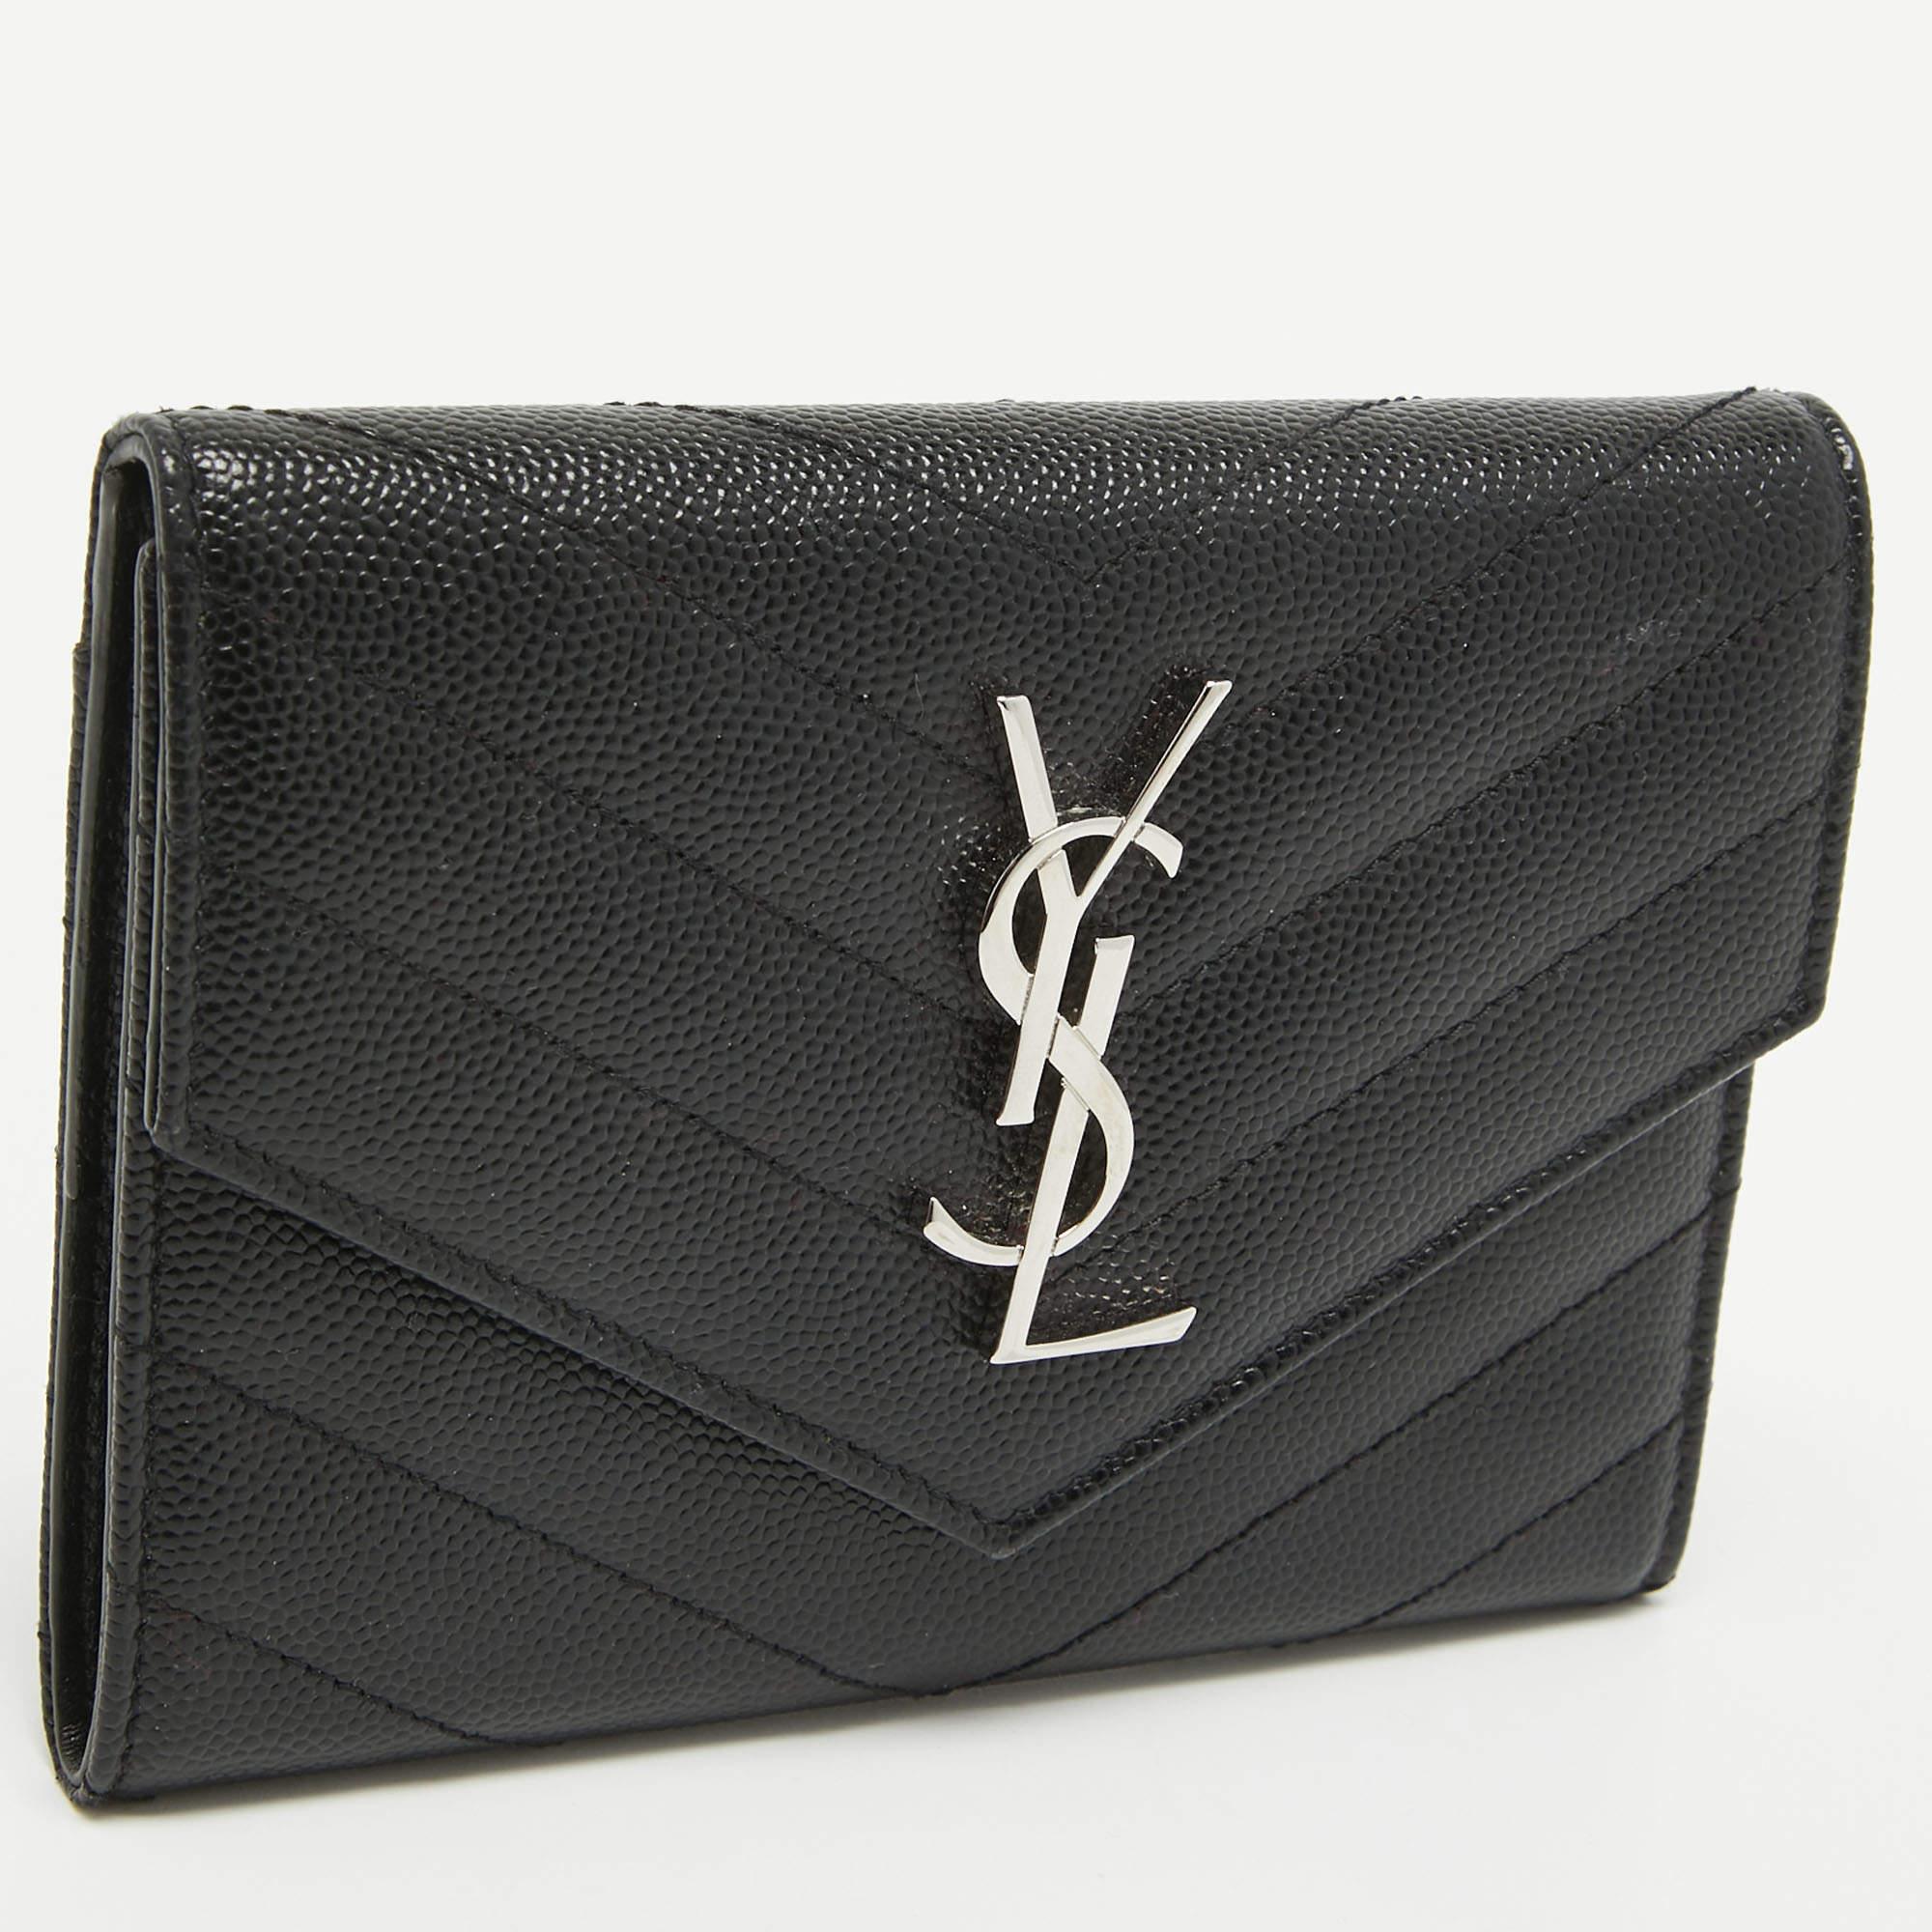 Exquisitely rendered from matelassé leather, this Saint Laurent wallet embodies a contemporary shape. Named after Adolphe Mouron Cassandre, this Cassandre wallet will incorporate a touch of luxury into your outfit. The brand detailing on the front